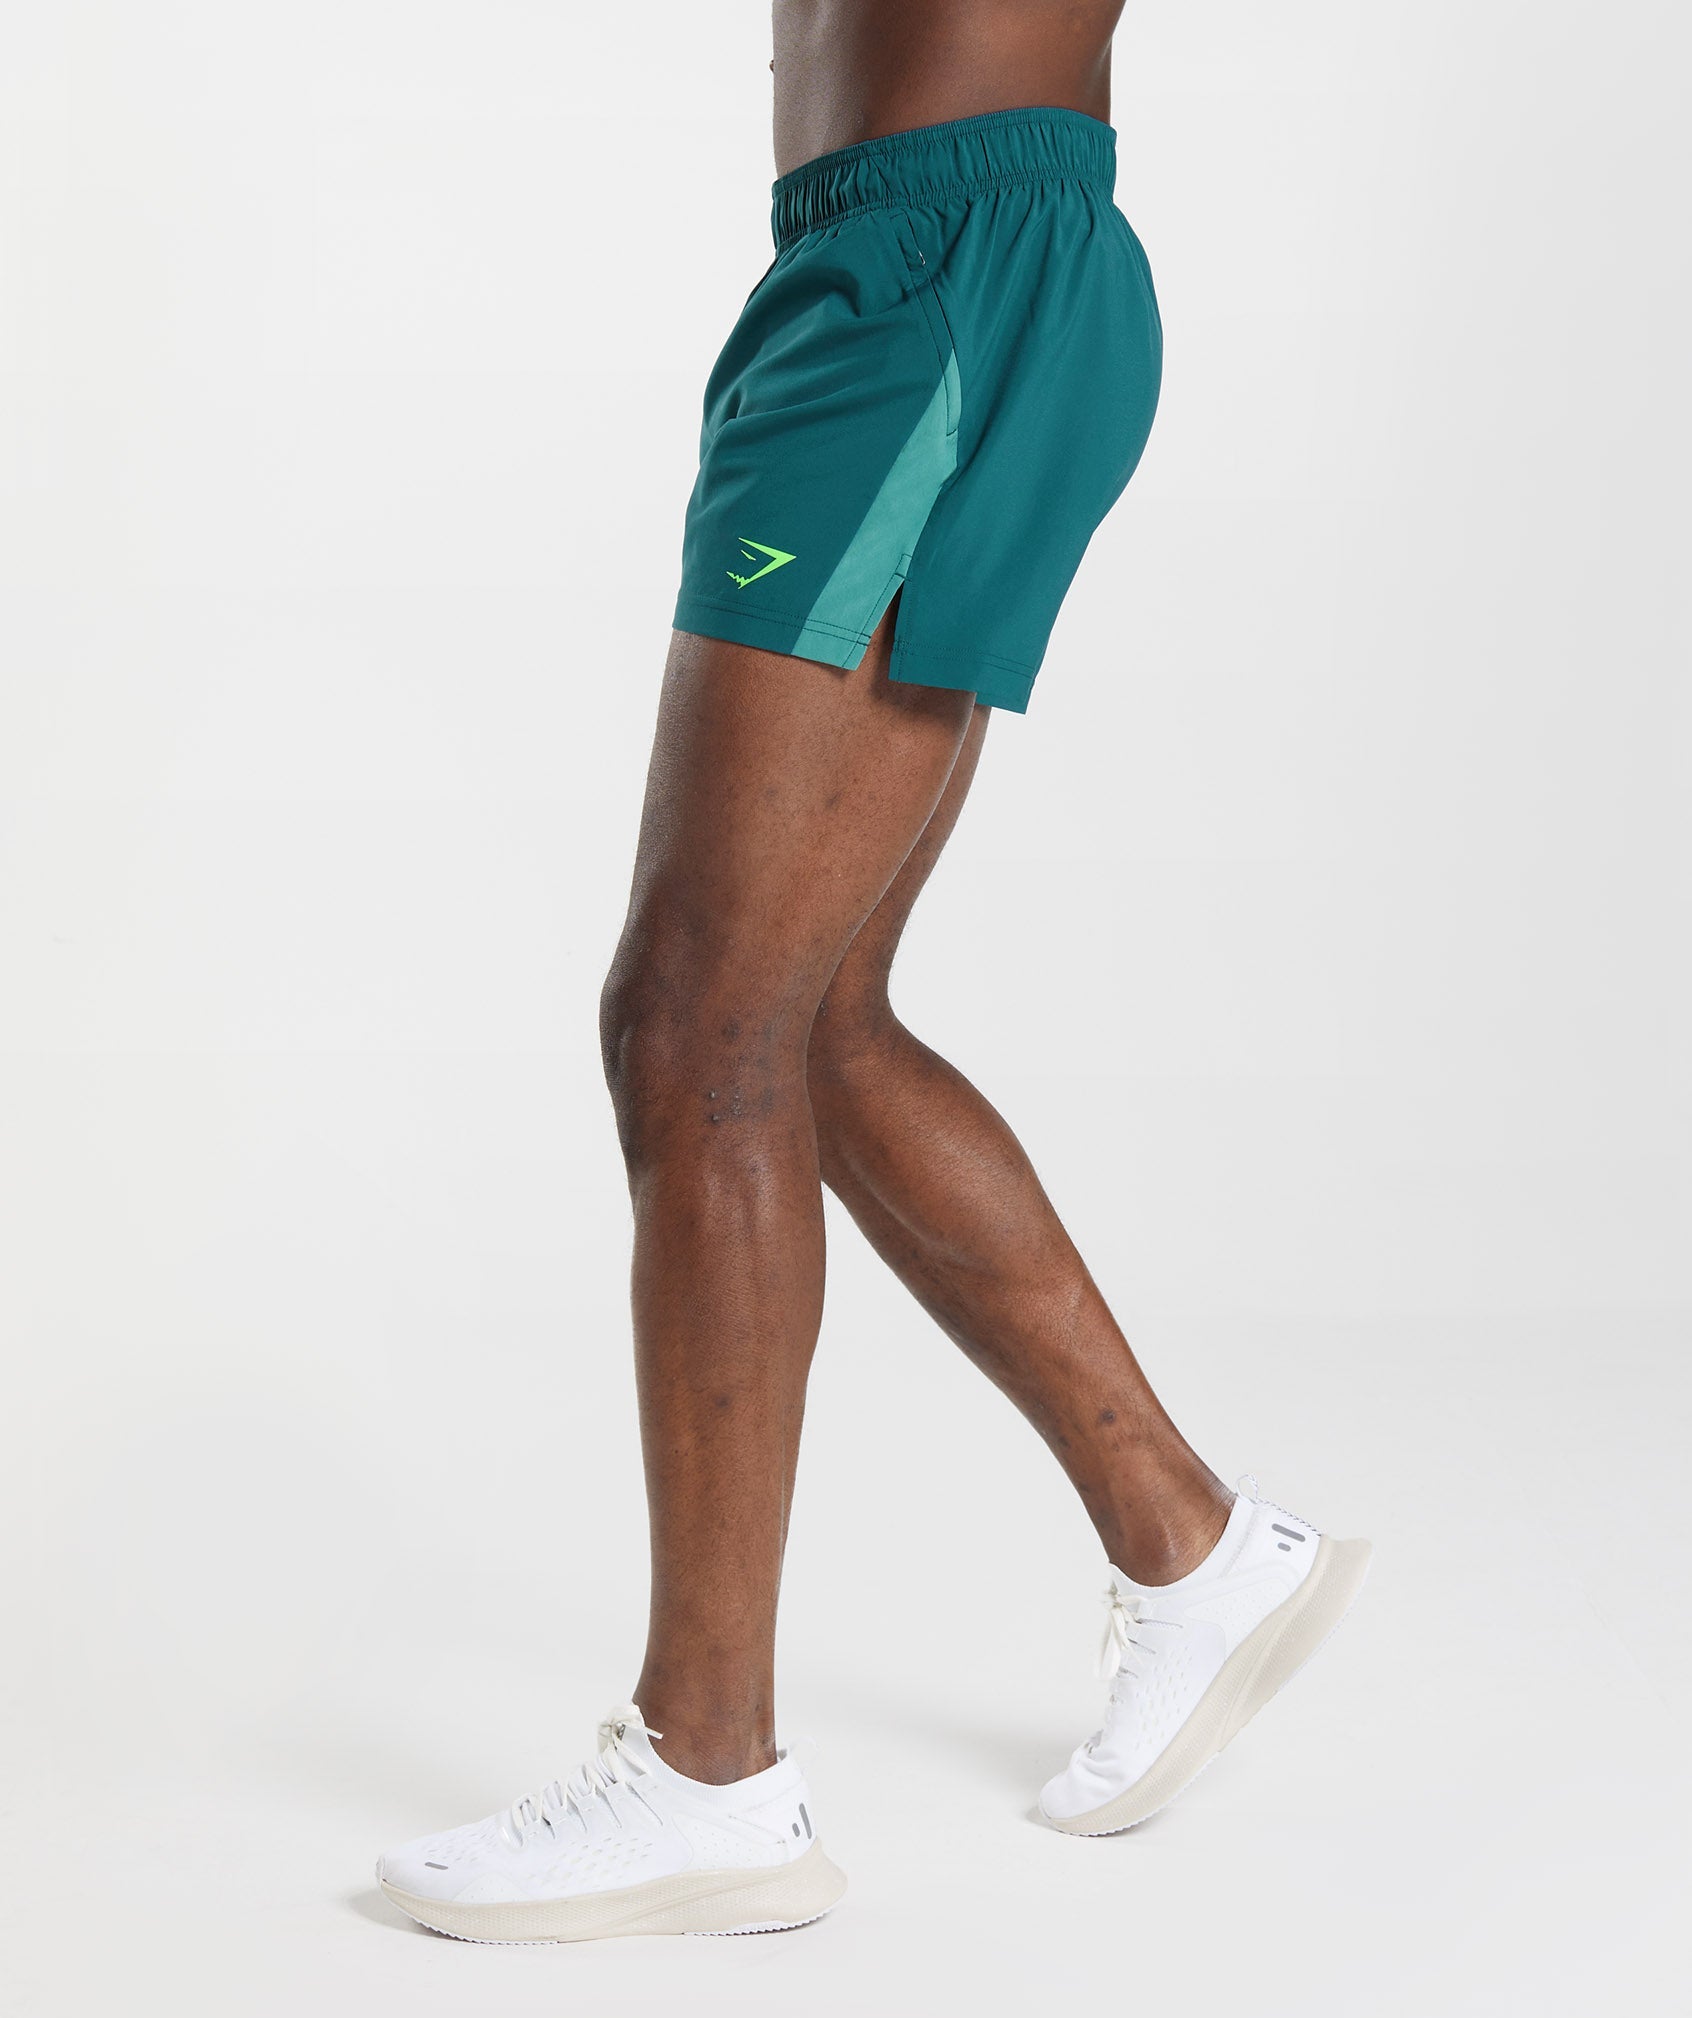 Sport 5" Shorts in Winter Teal/Slate Blue - view 3